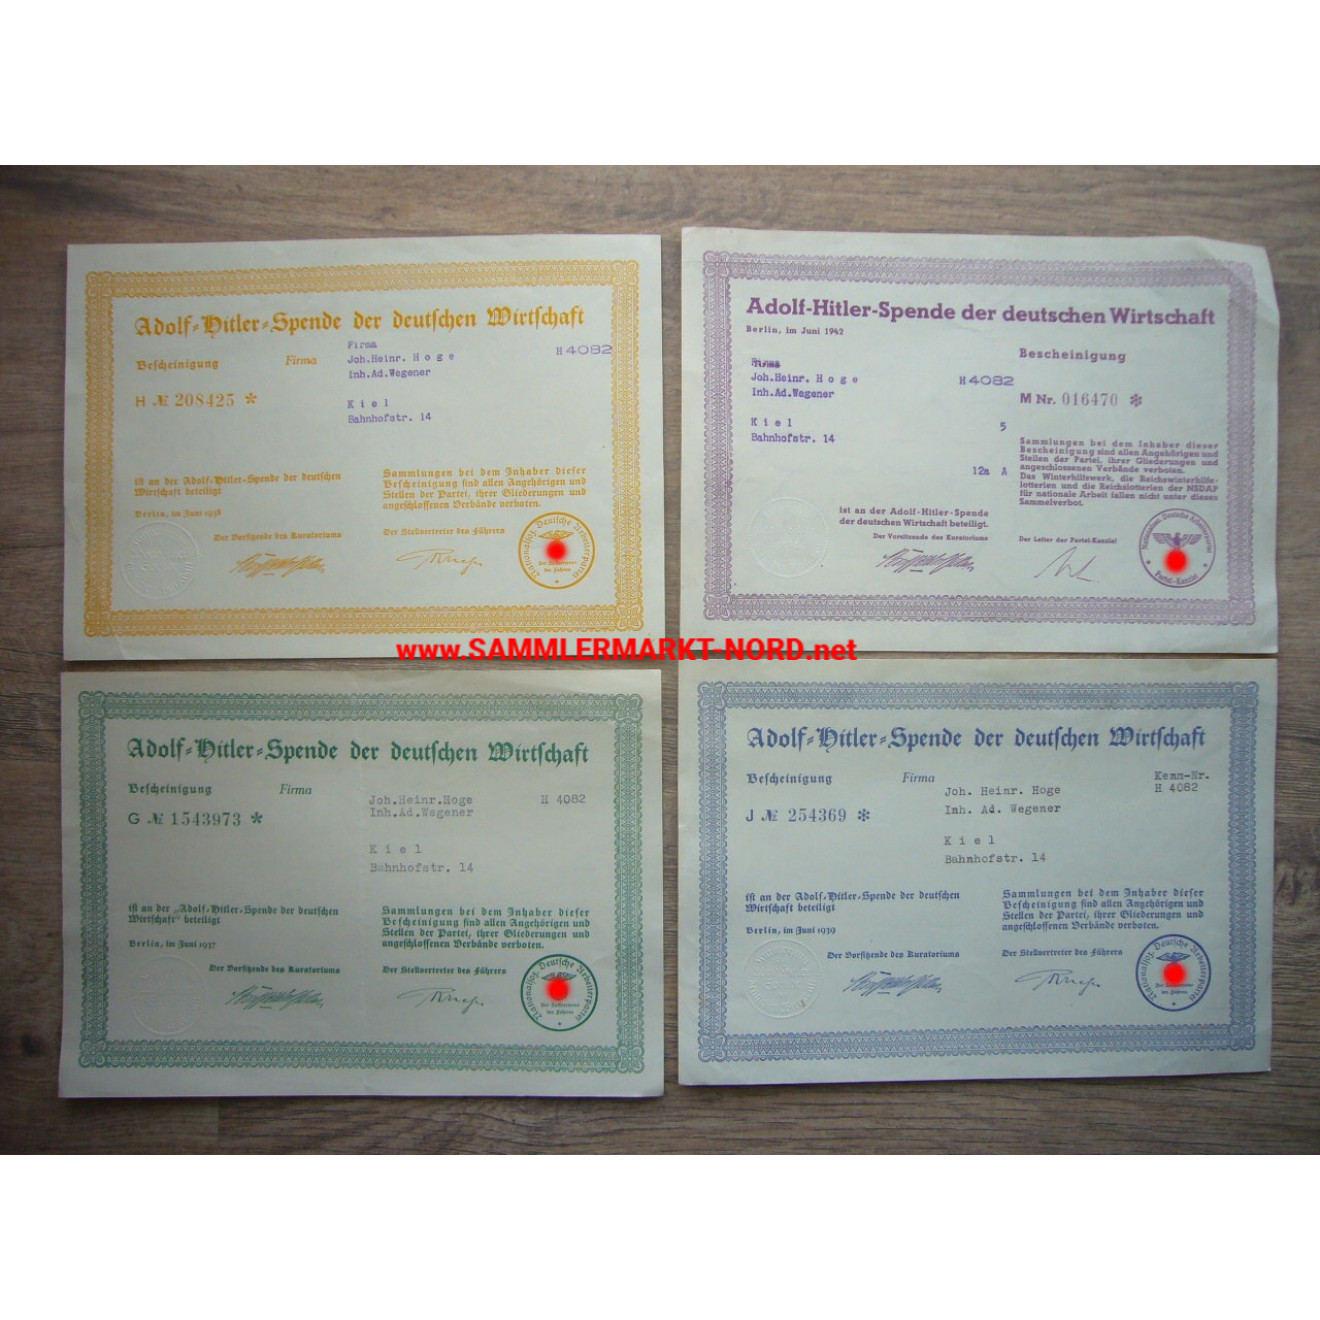 4 x donation certificate - Adolf Hitler donation from the German economy